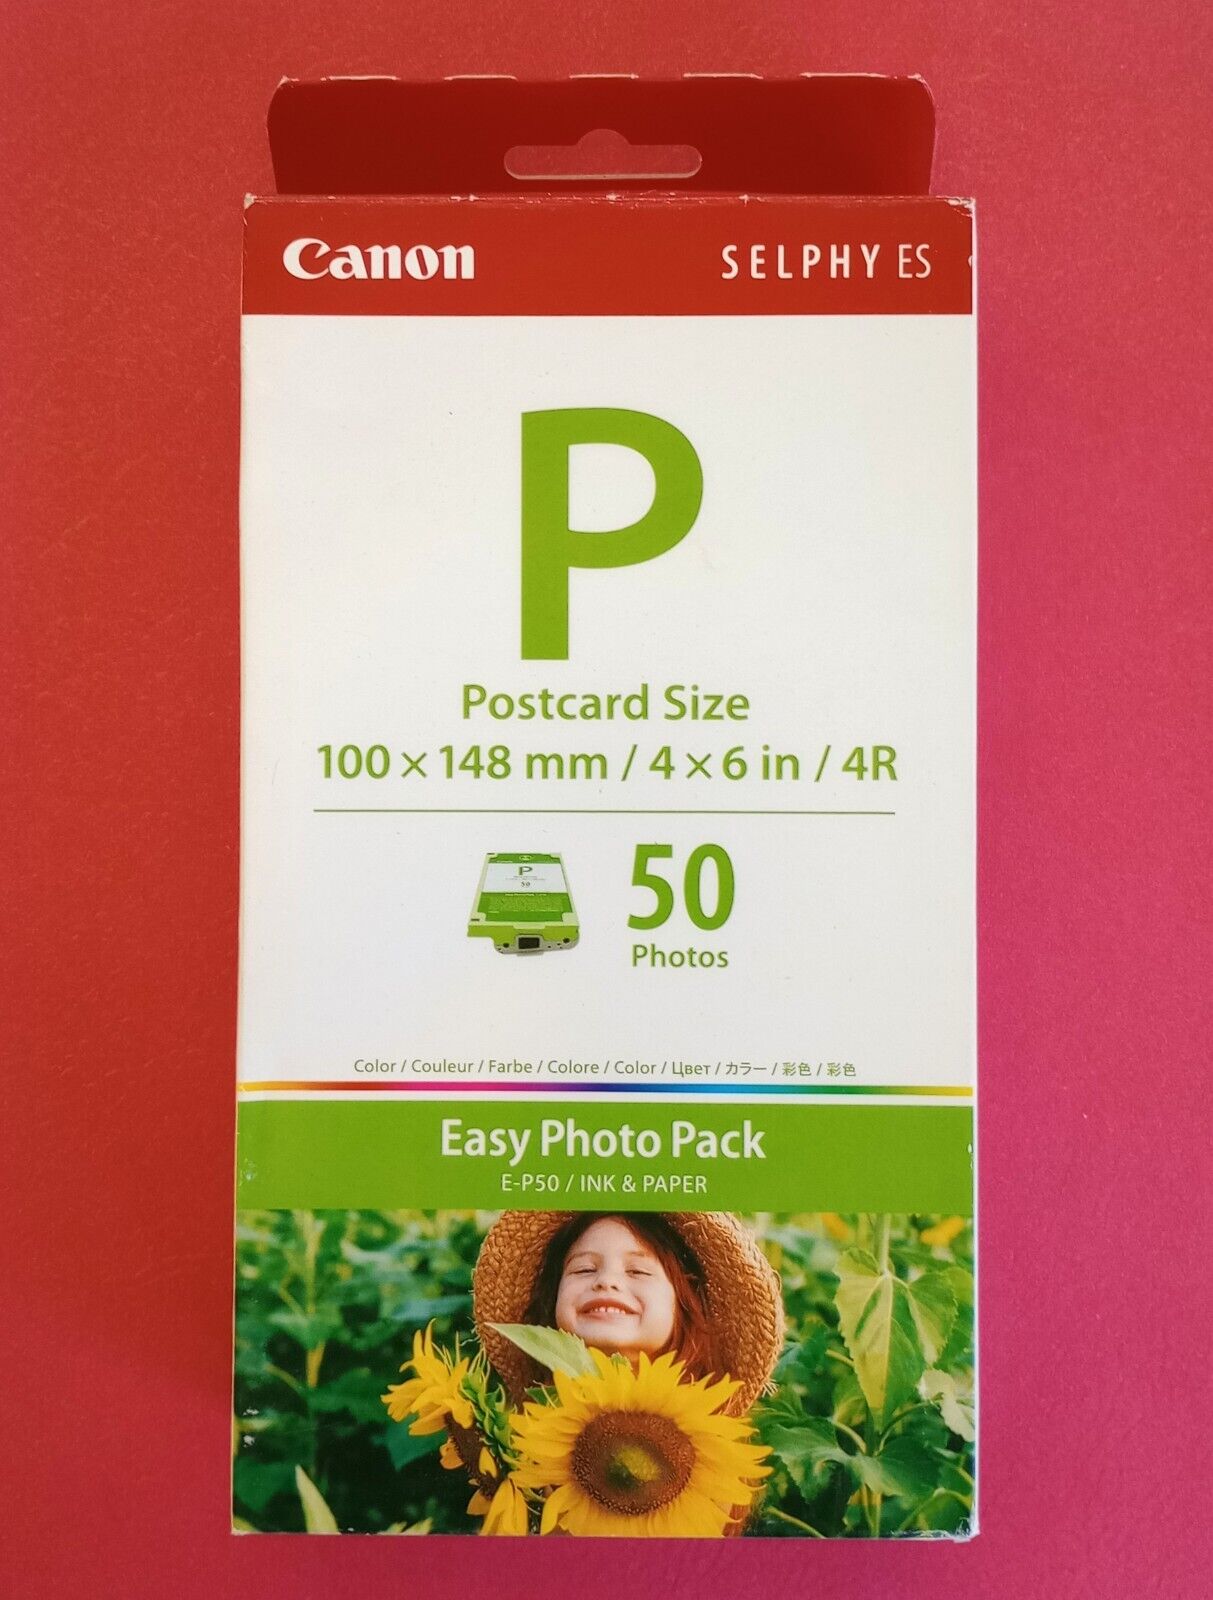 Canon Easy Photo Pack E-P50 Ink & Paper SELPHY Postcard Size 4” x 6” NOS